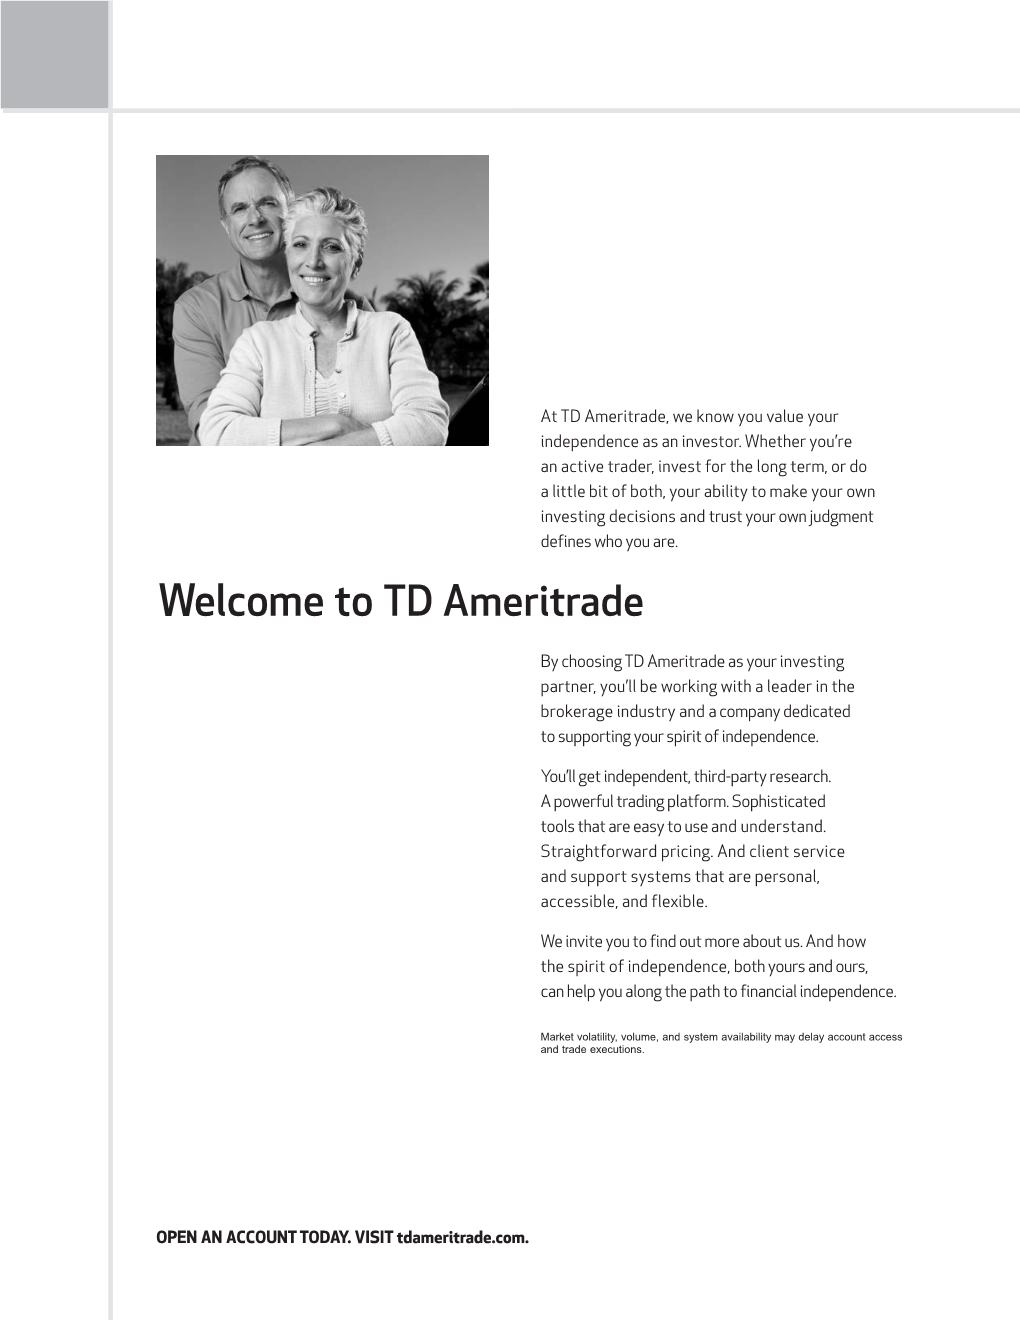 Welcome to TD Ameritrade